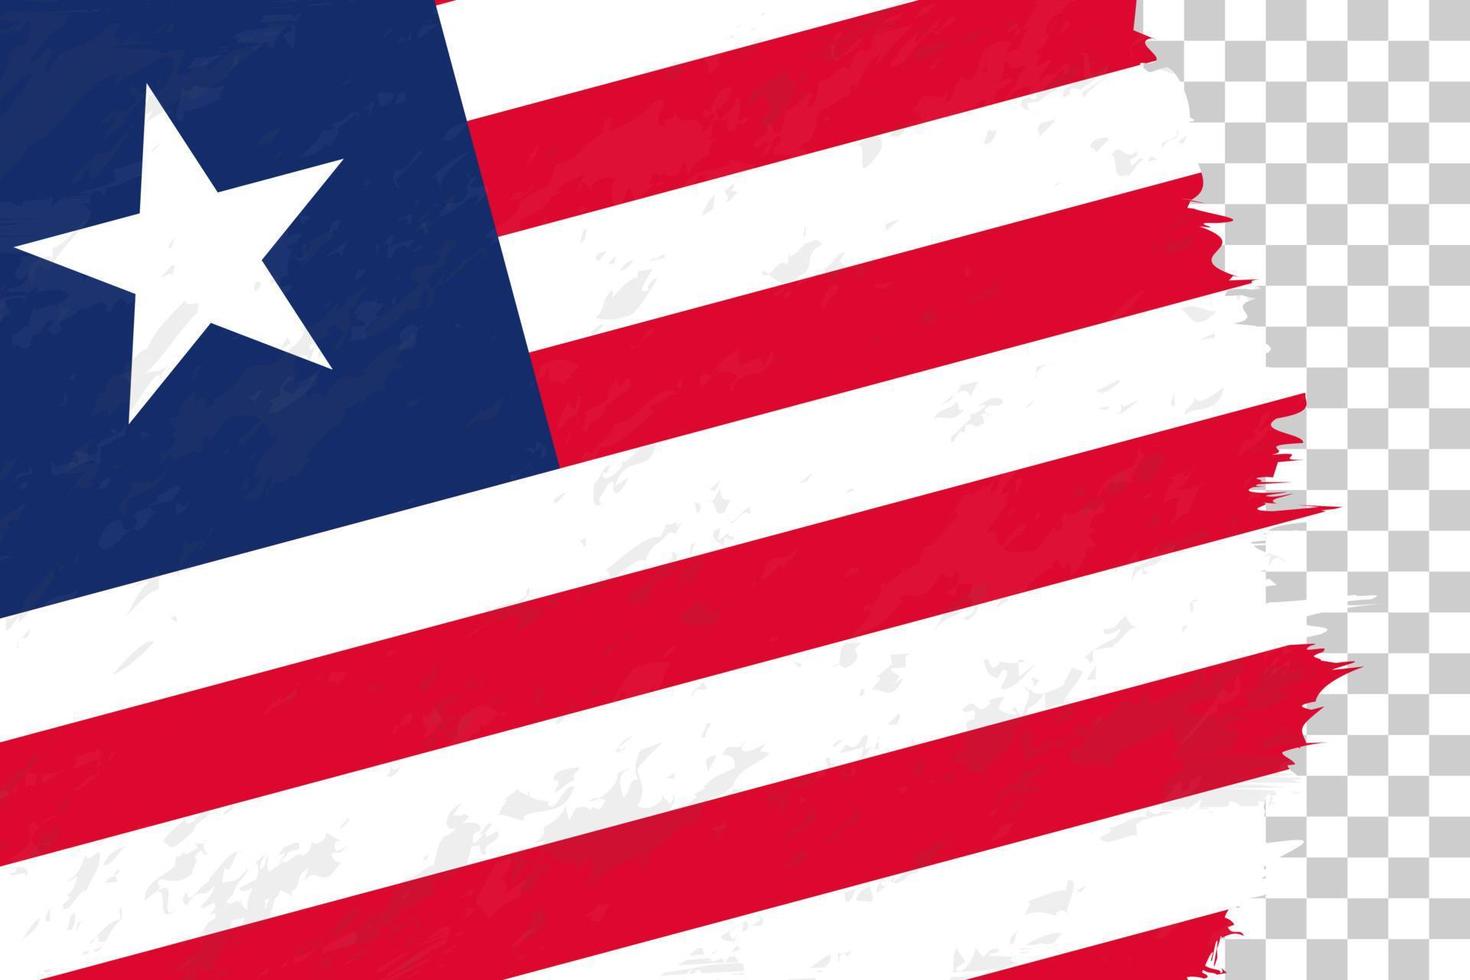 Horizontal Abstract Grunge Brushed Flag of Liberia on Transparent Grid. vector